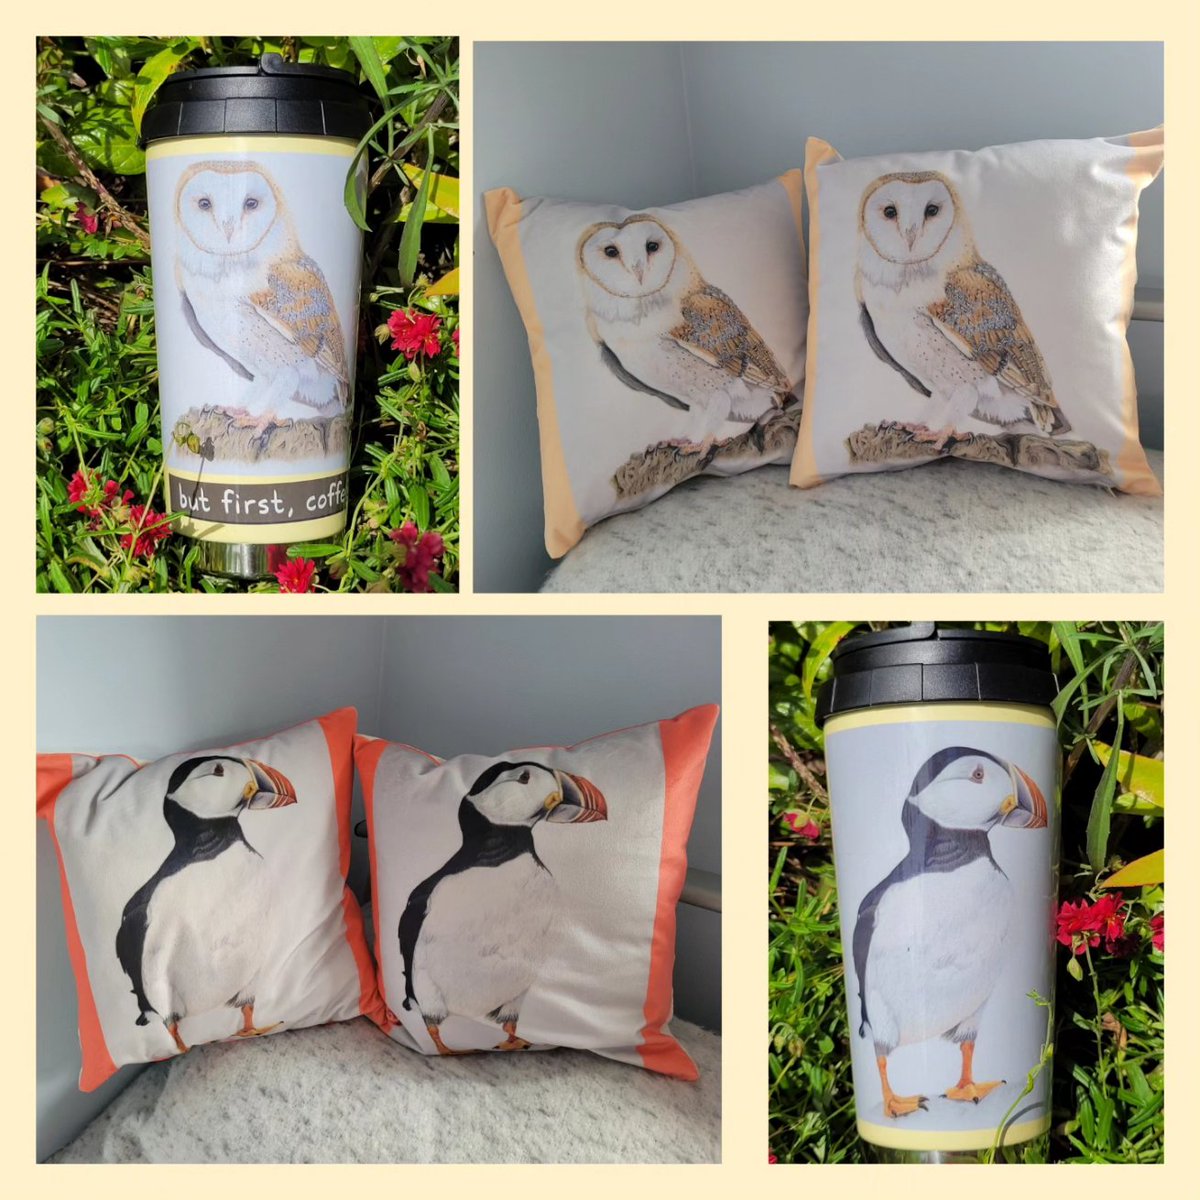 The colours have come out beautifully, I hope you like these new designs as much as I do.

cmcreative.uk/shop

#barnowl #puffins #puffinart #barnowlart #owlart #owls #owlgifts #puffingifts #wildlifegifts #birdgifts #birdart #ukbirds #seabirds #puffinlove